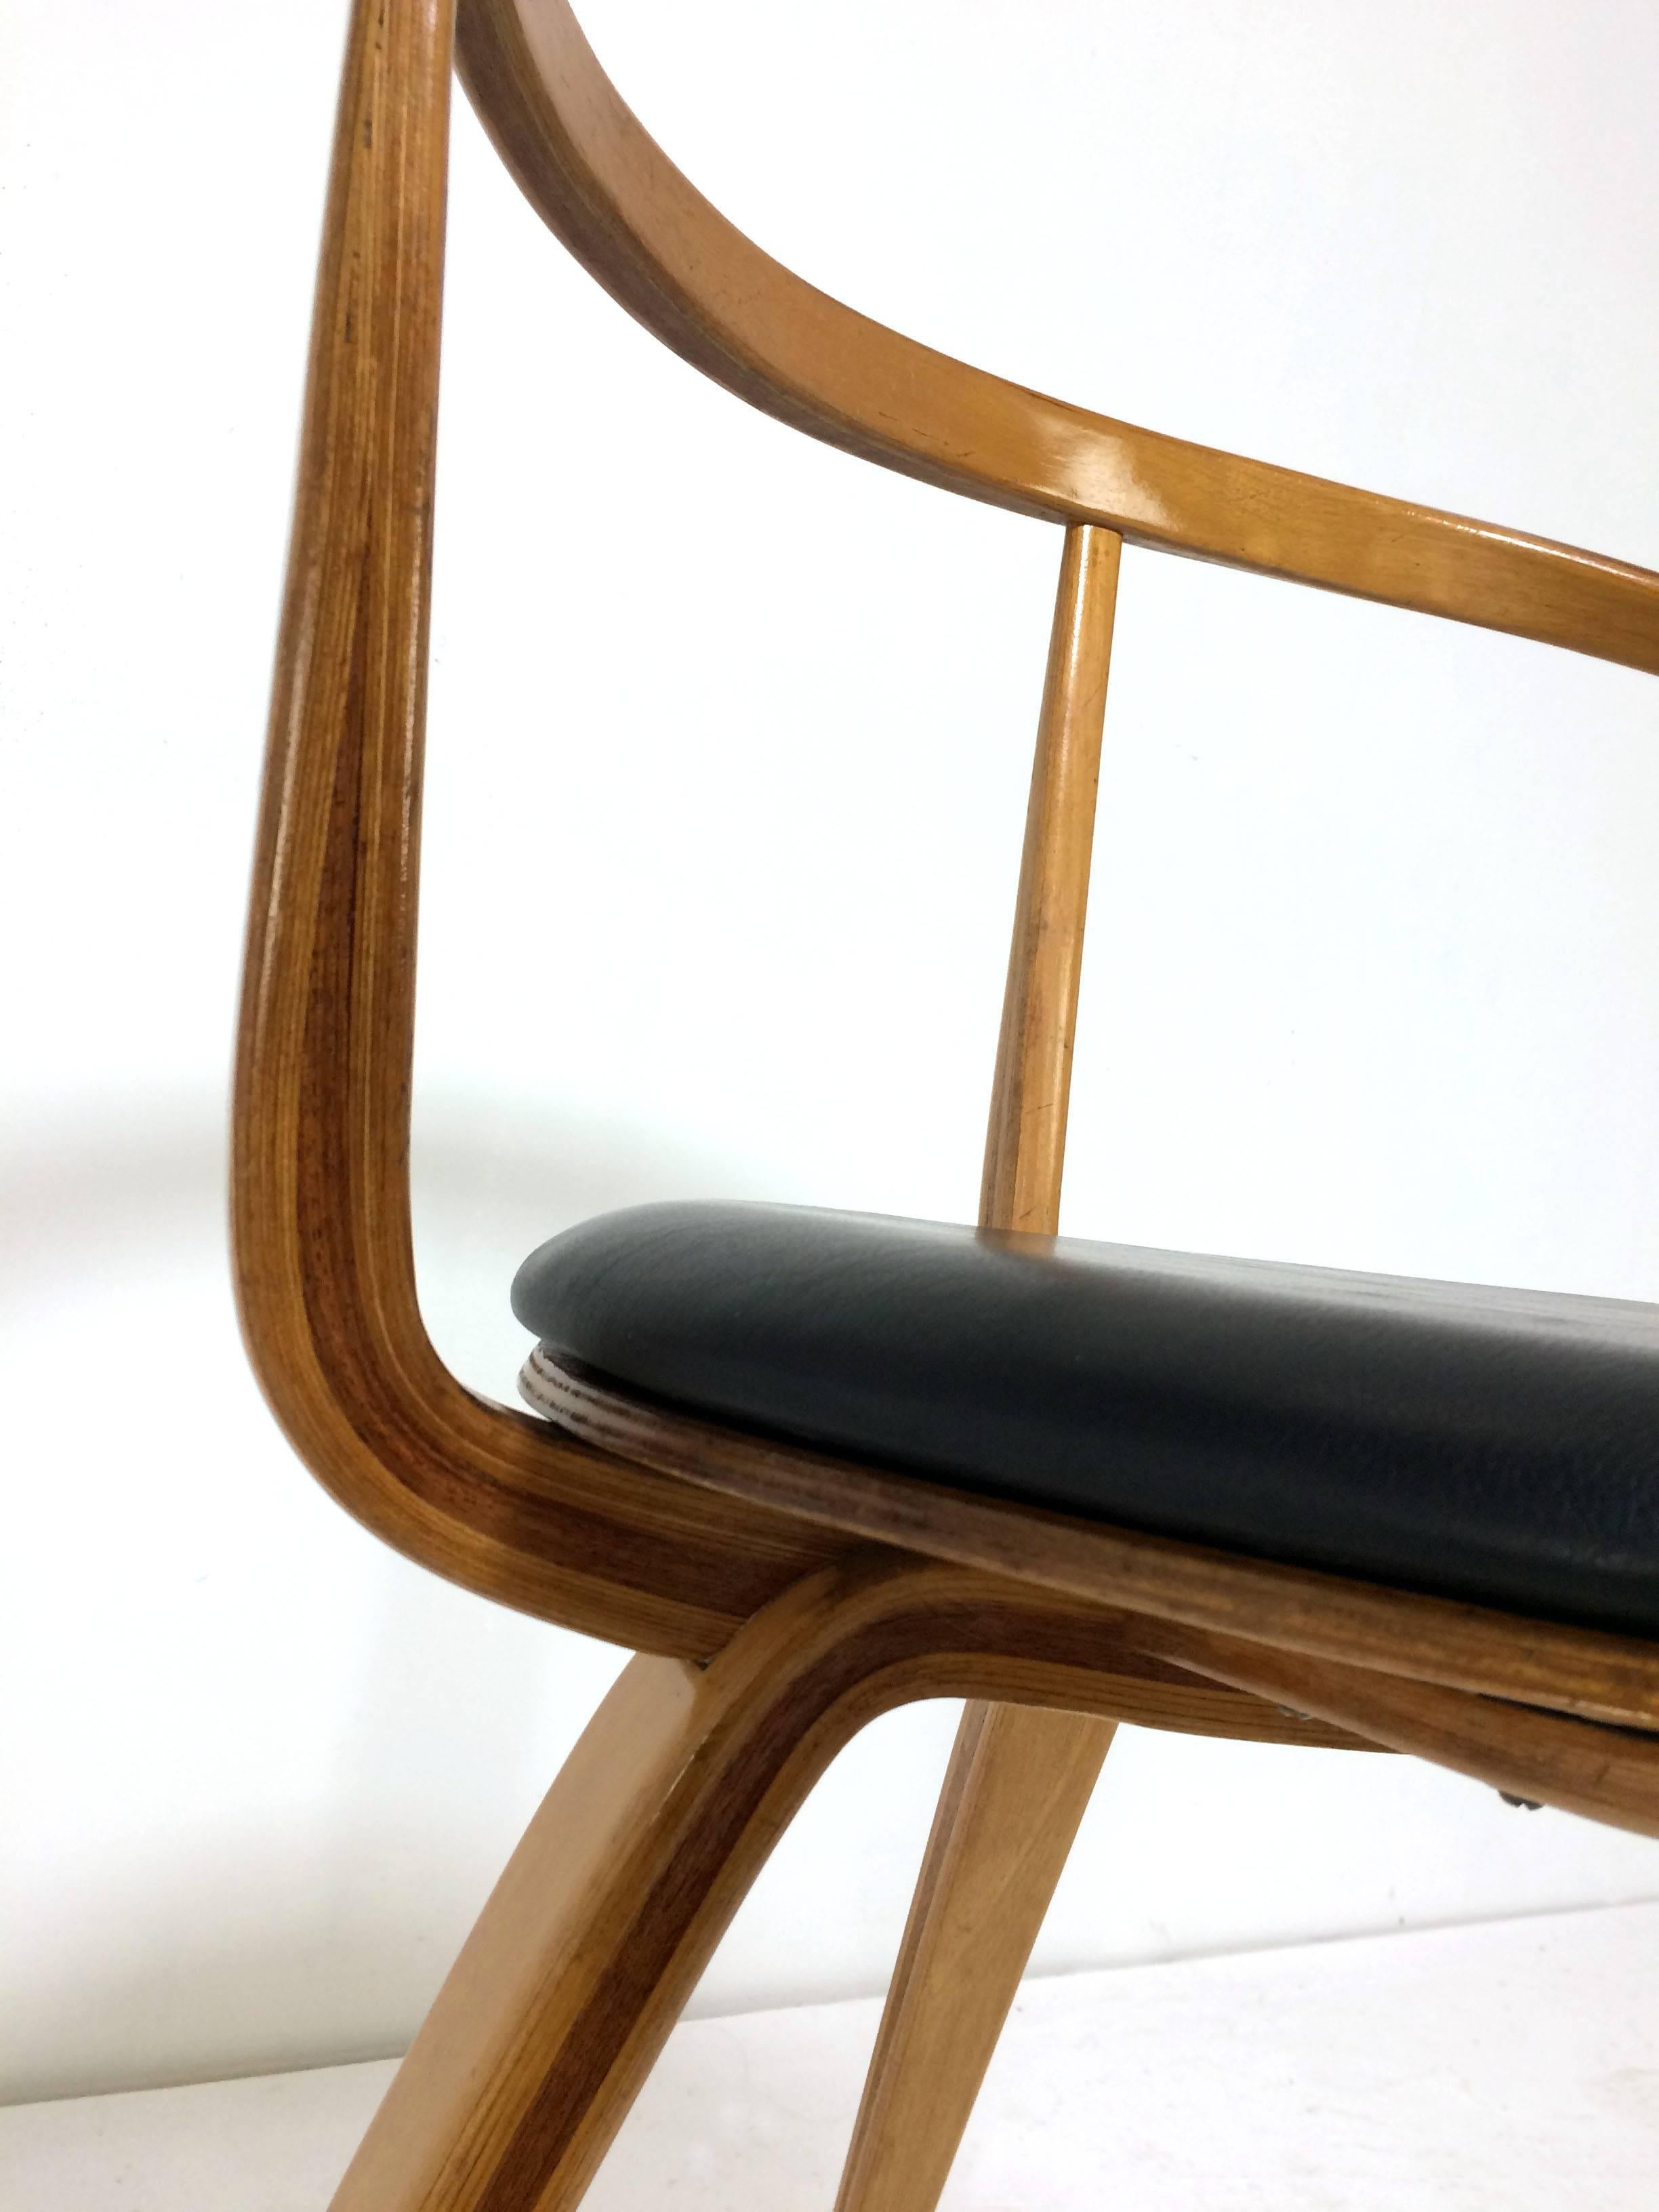 Mid-20th Century George Nelson Pretzel Chair for Herman Miller, circa 1950s